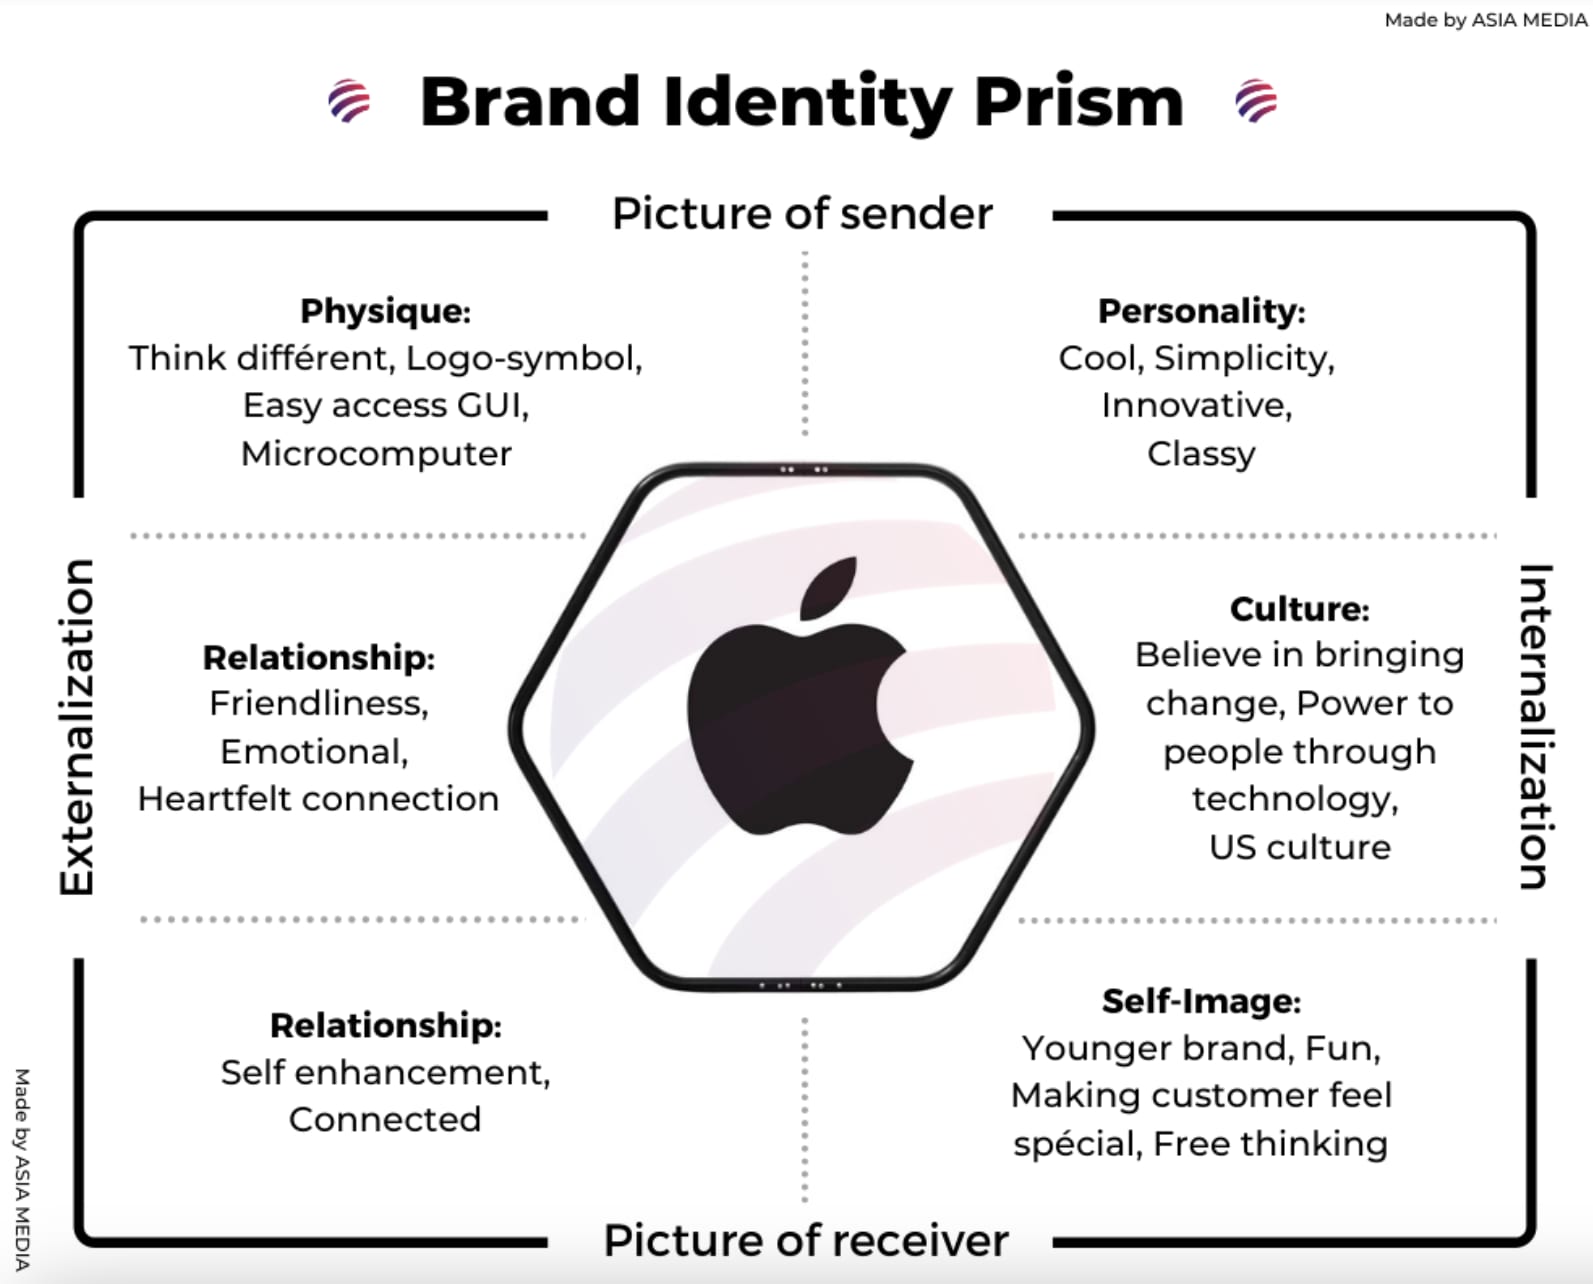 Brand Identity Prism by Asia Media, infographic on brand physique, personality, relationship, culture, and self-image.